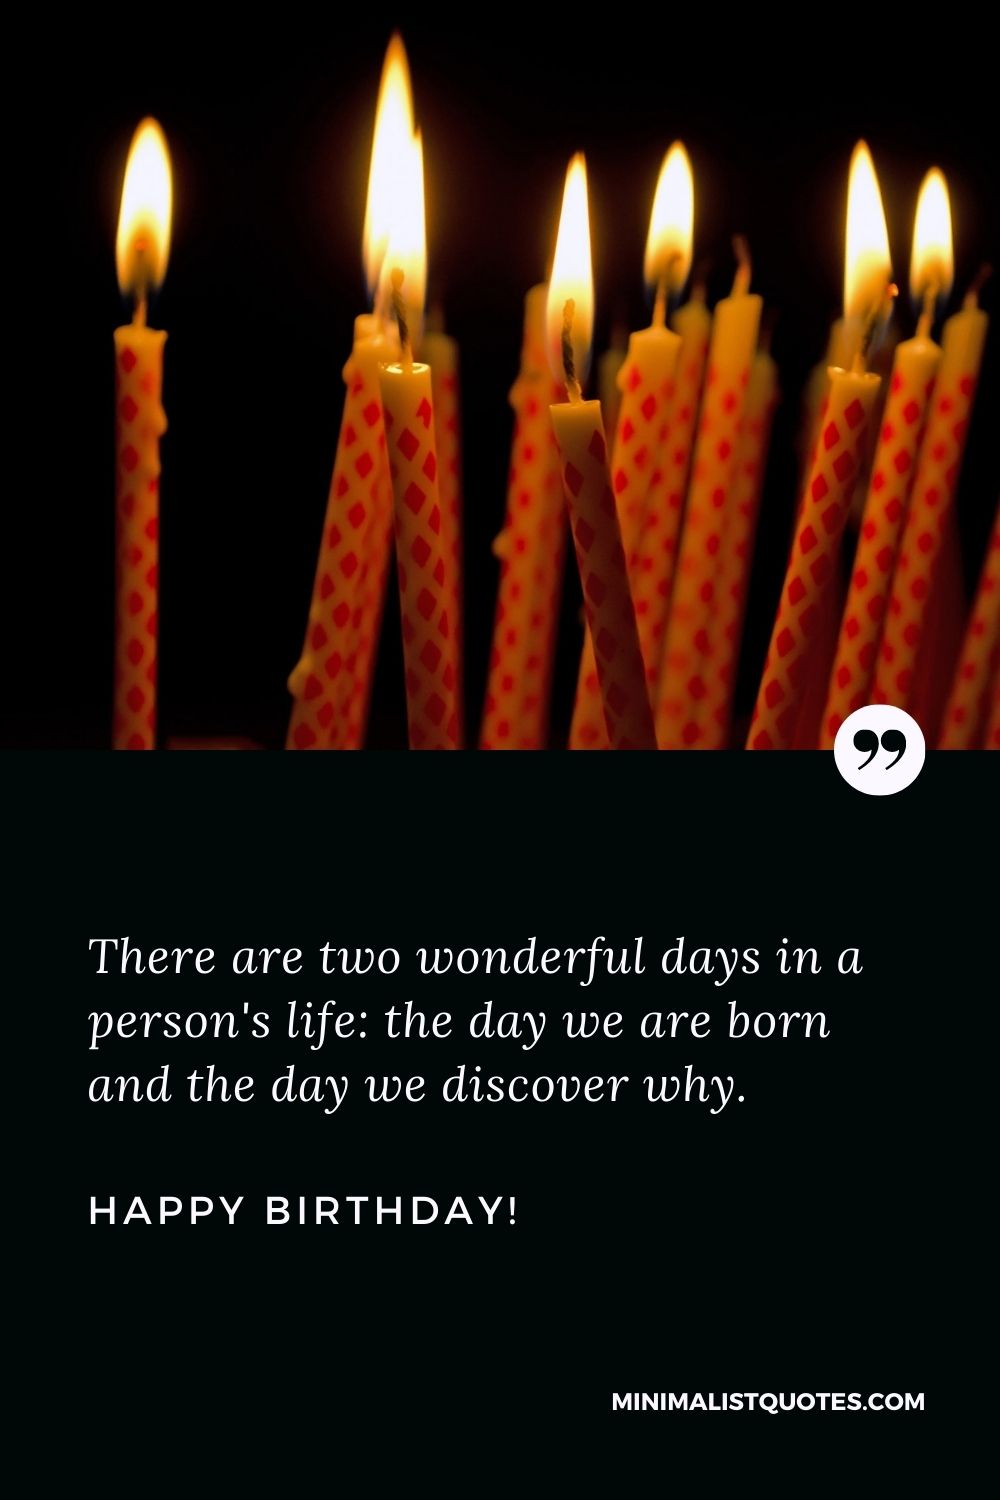 There are two wonderful days in a person's life: the day we are born and  the day we discover why. Happy Birthday!